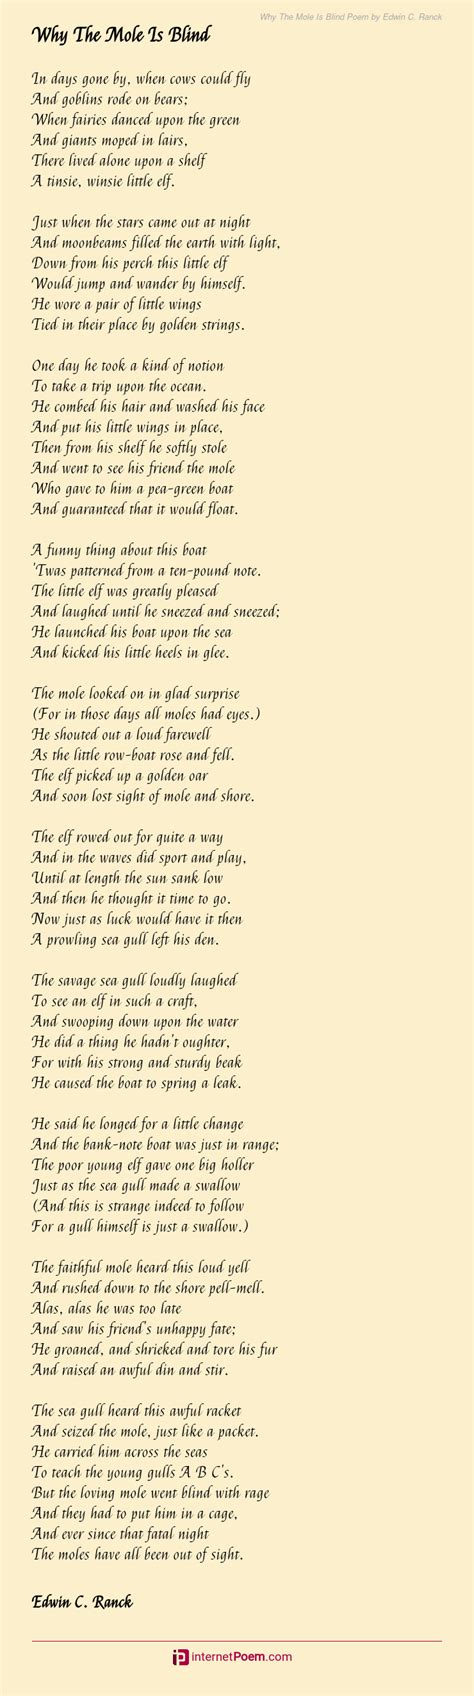 Why The Mole Is Blind Poem By Edwin C Ranck